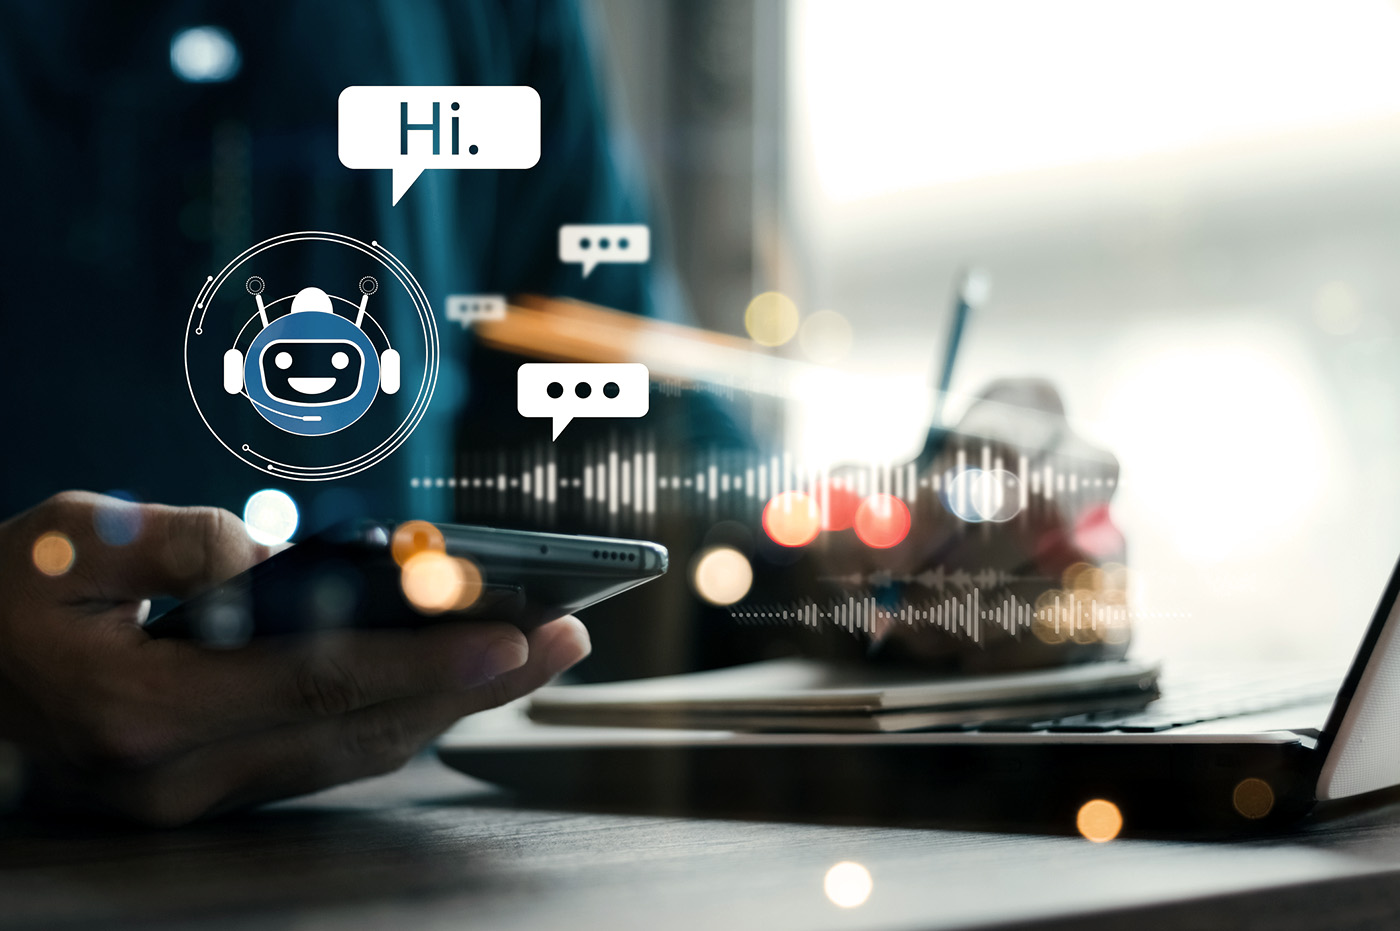 How To Create Chatbots With Power Virtual Agents